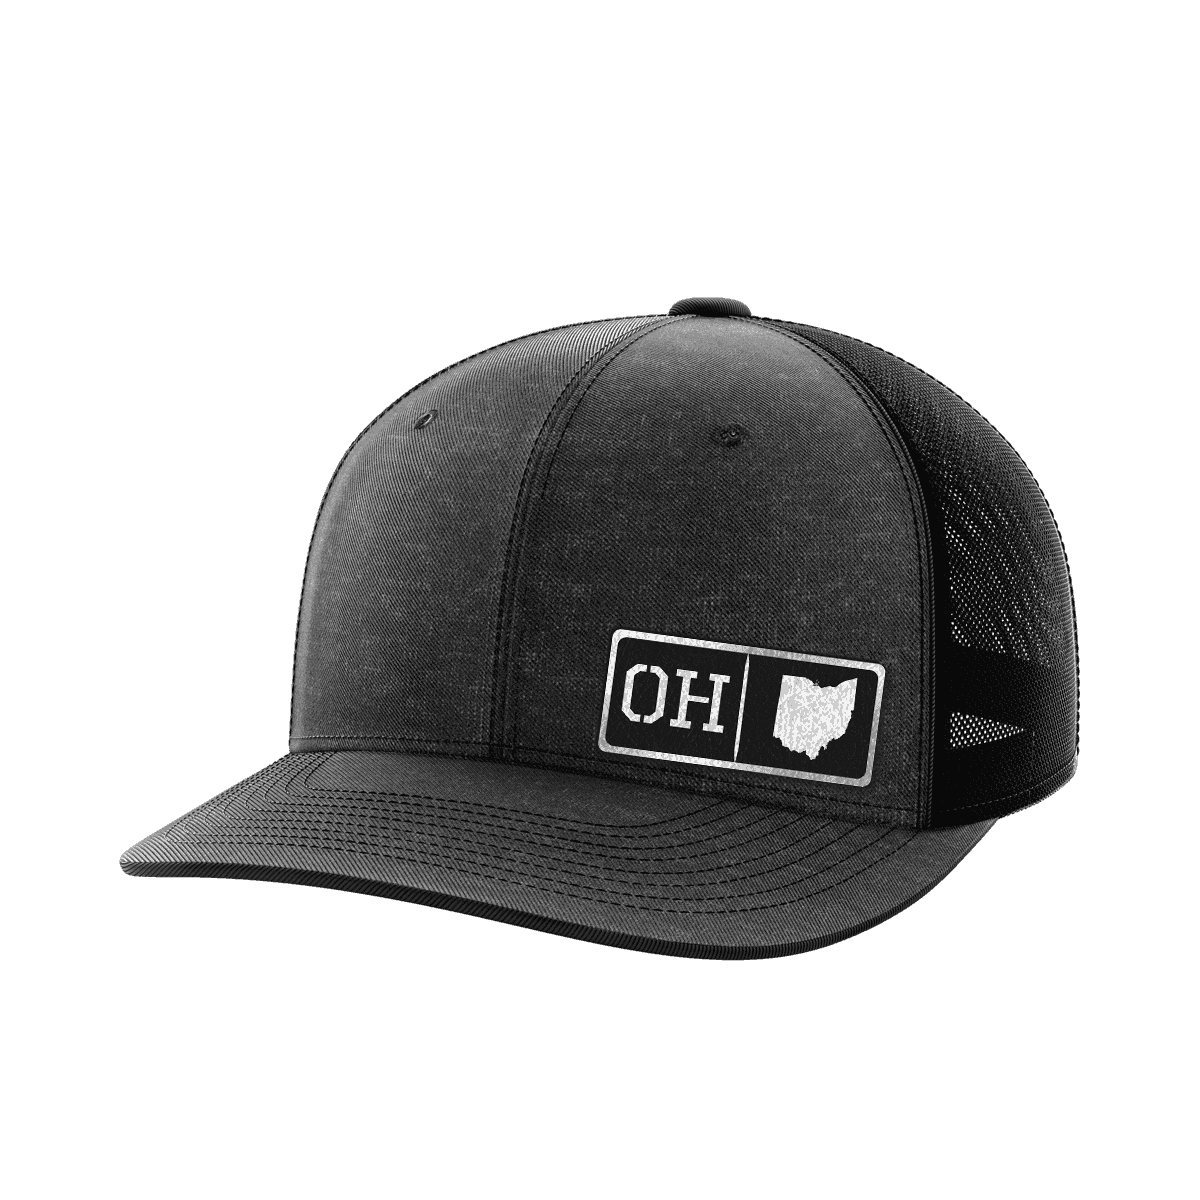 Ohio Homegrown Hats - Greater Half